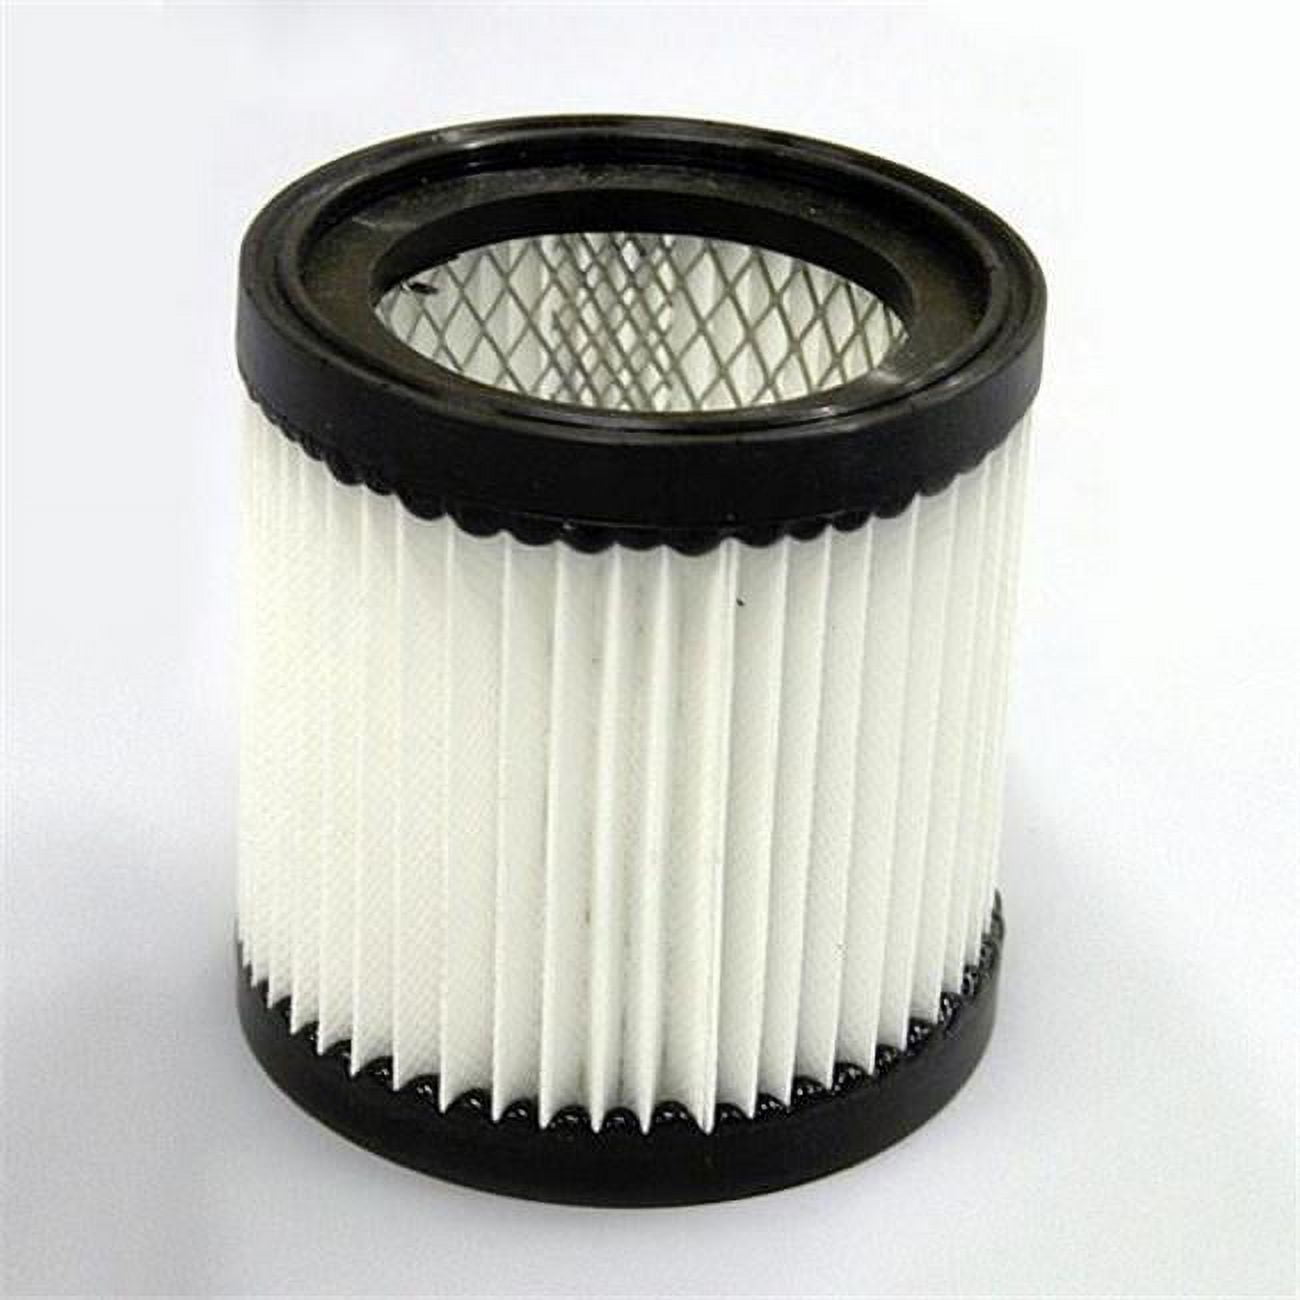 Picture of A.W. Perkins 3552816 411 High Efficiency Particulate Air Filter for Hearth Country Ash Vacuum